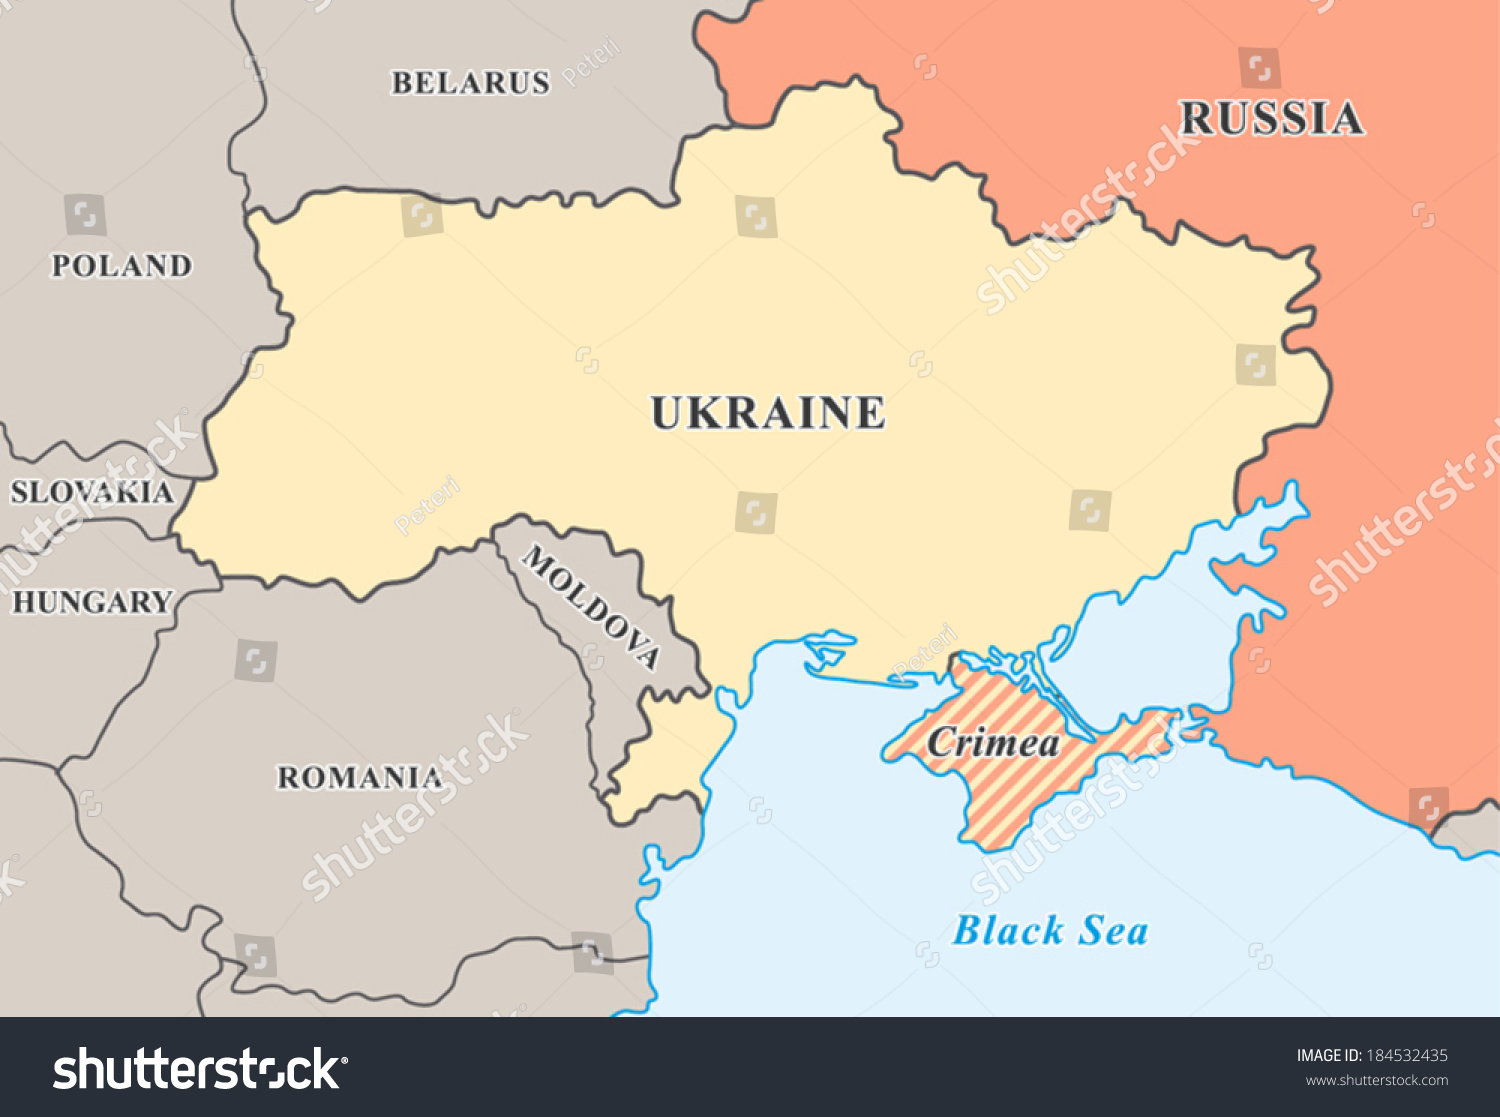 Image result for IMAGE OF MAP OF CRIMEA